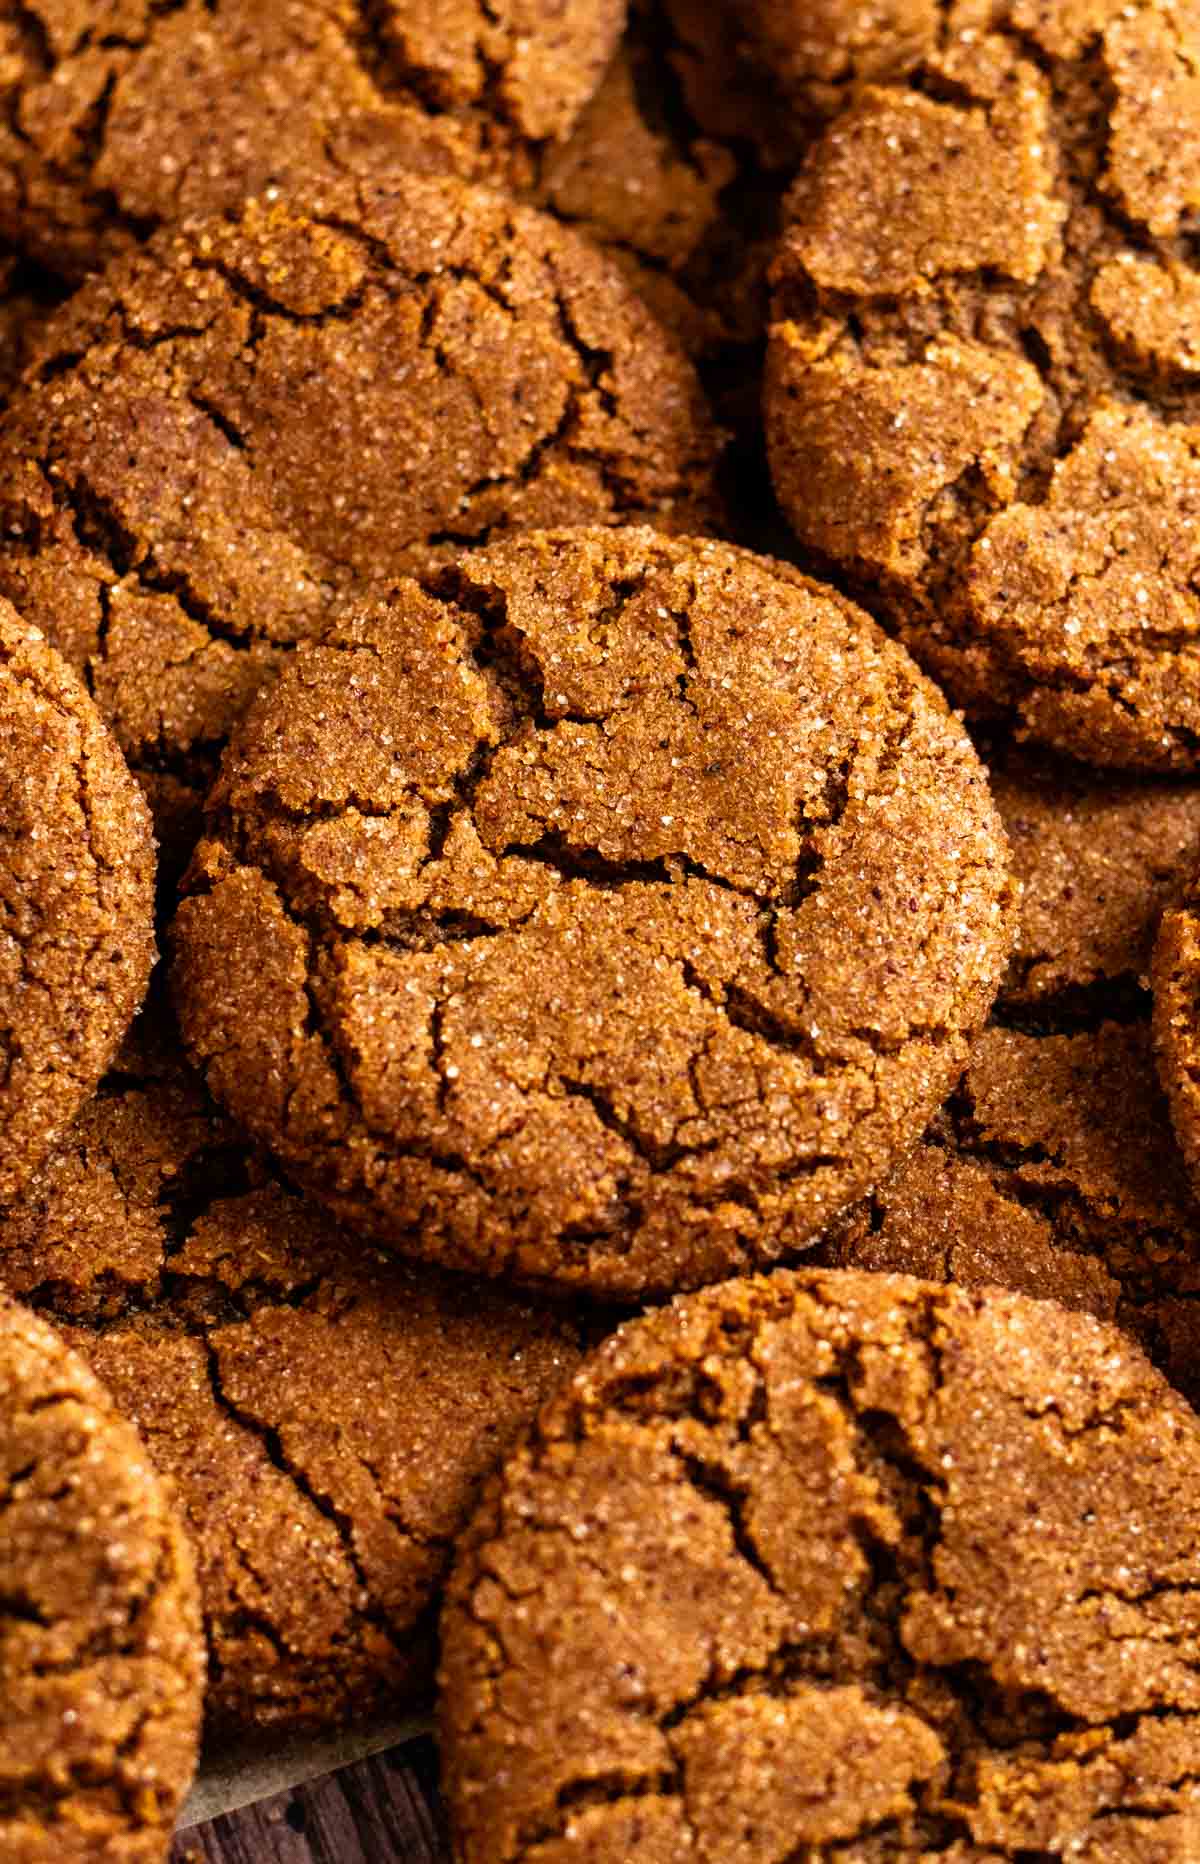 Top of ginger snaps.